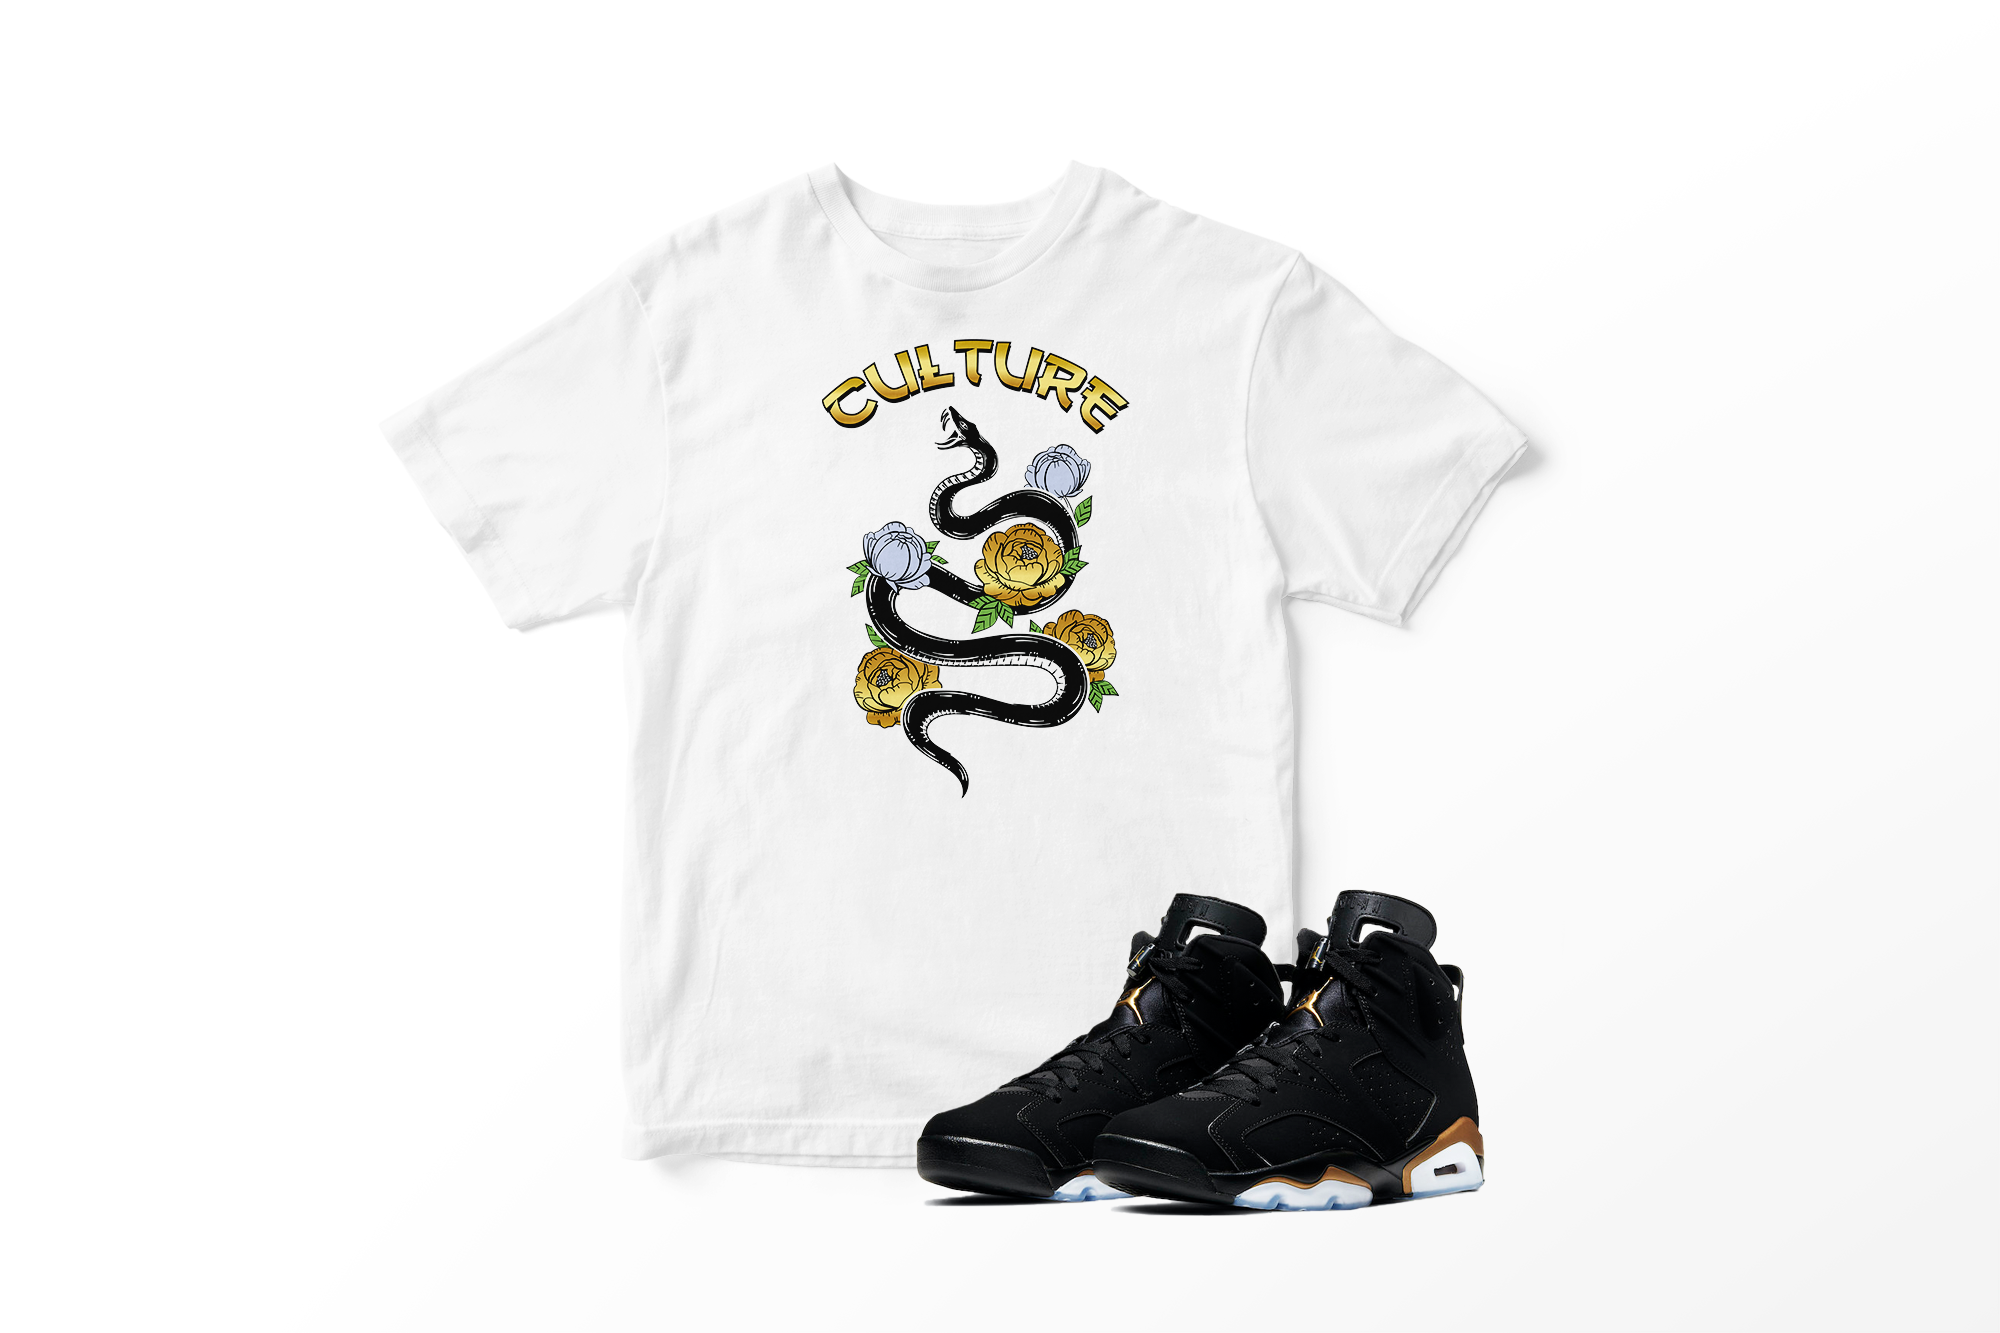 'Culture Snake' in DMP CW Short Sleeve Tee